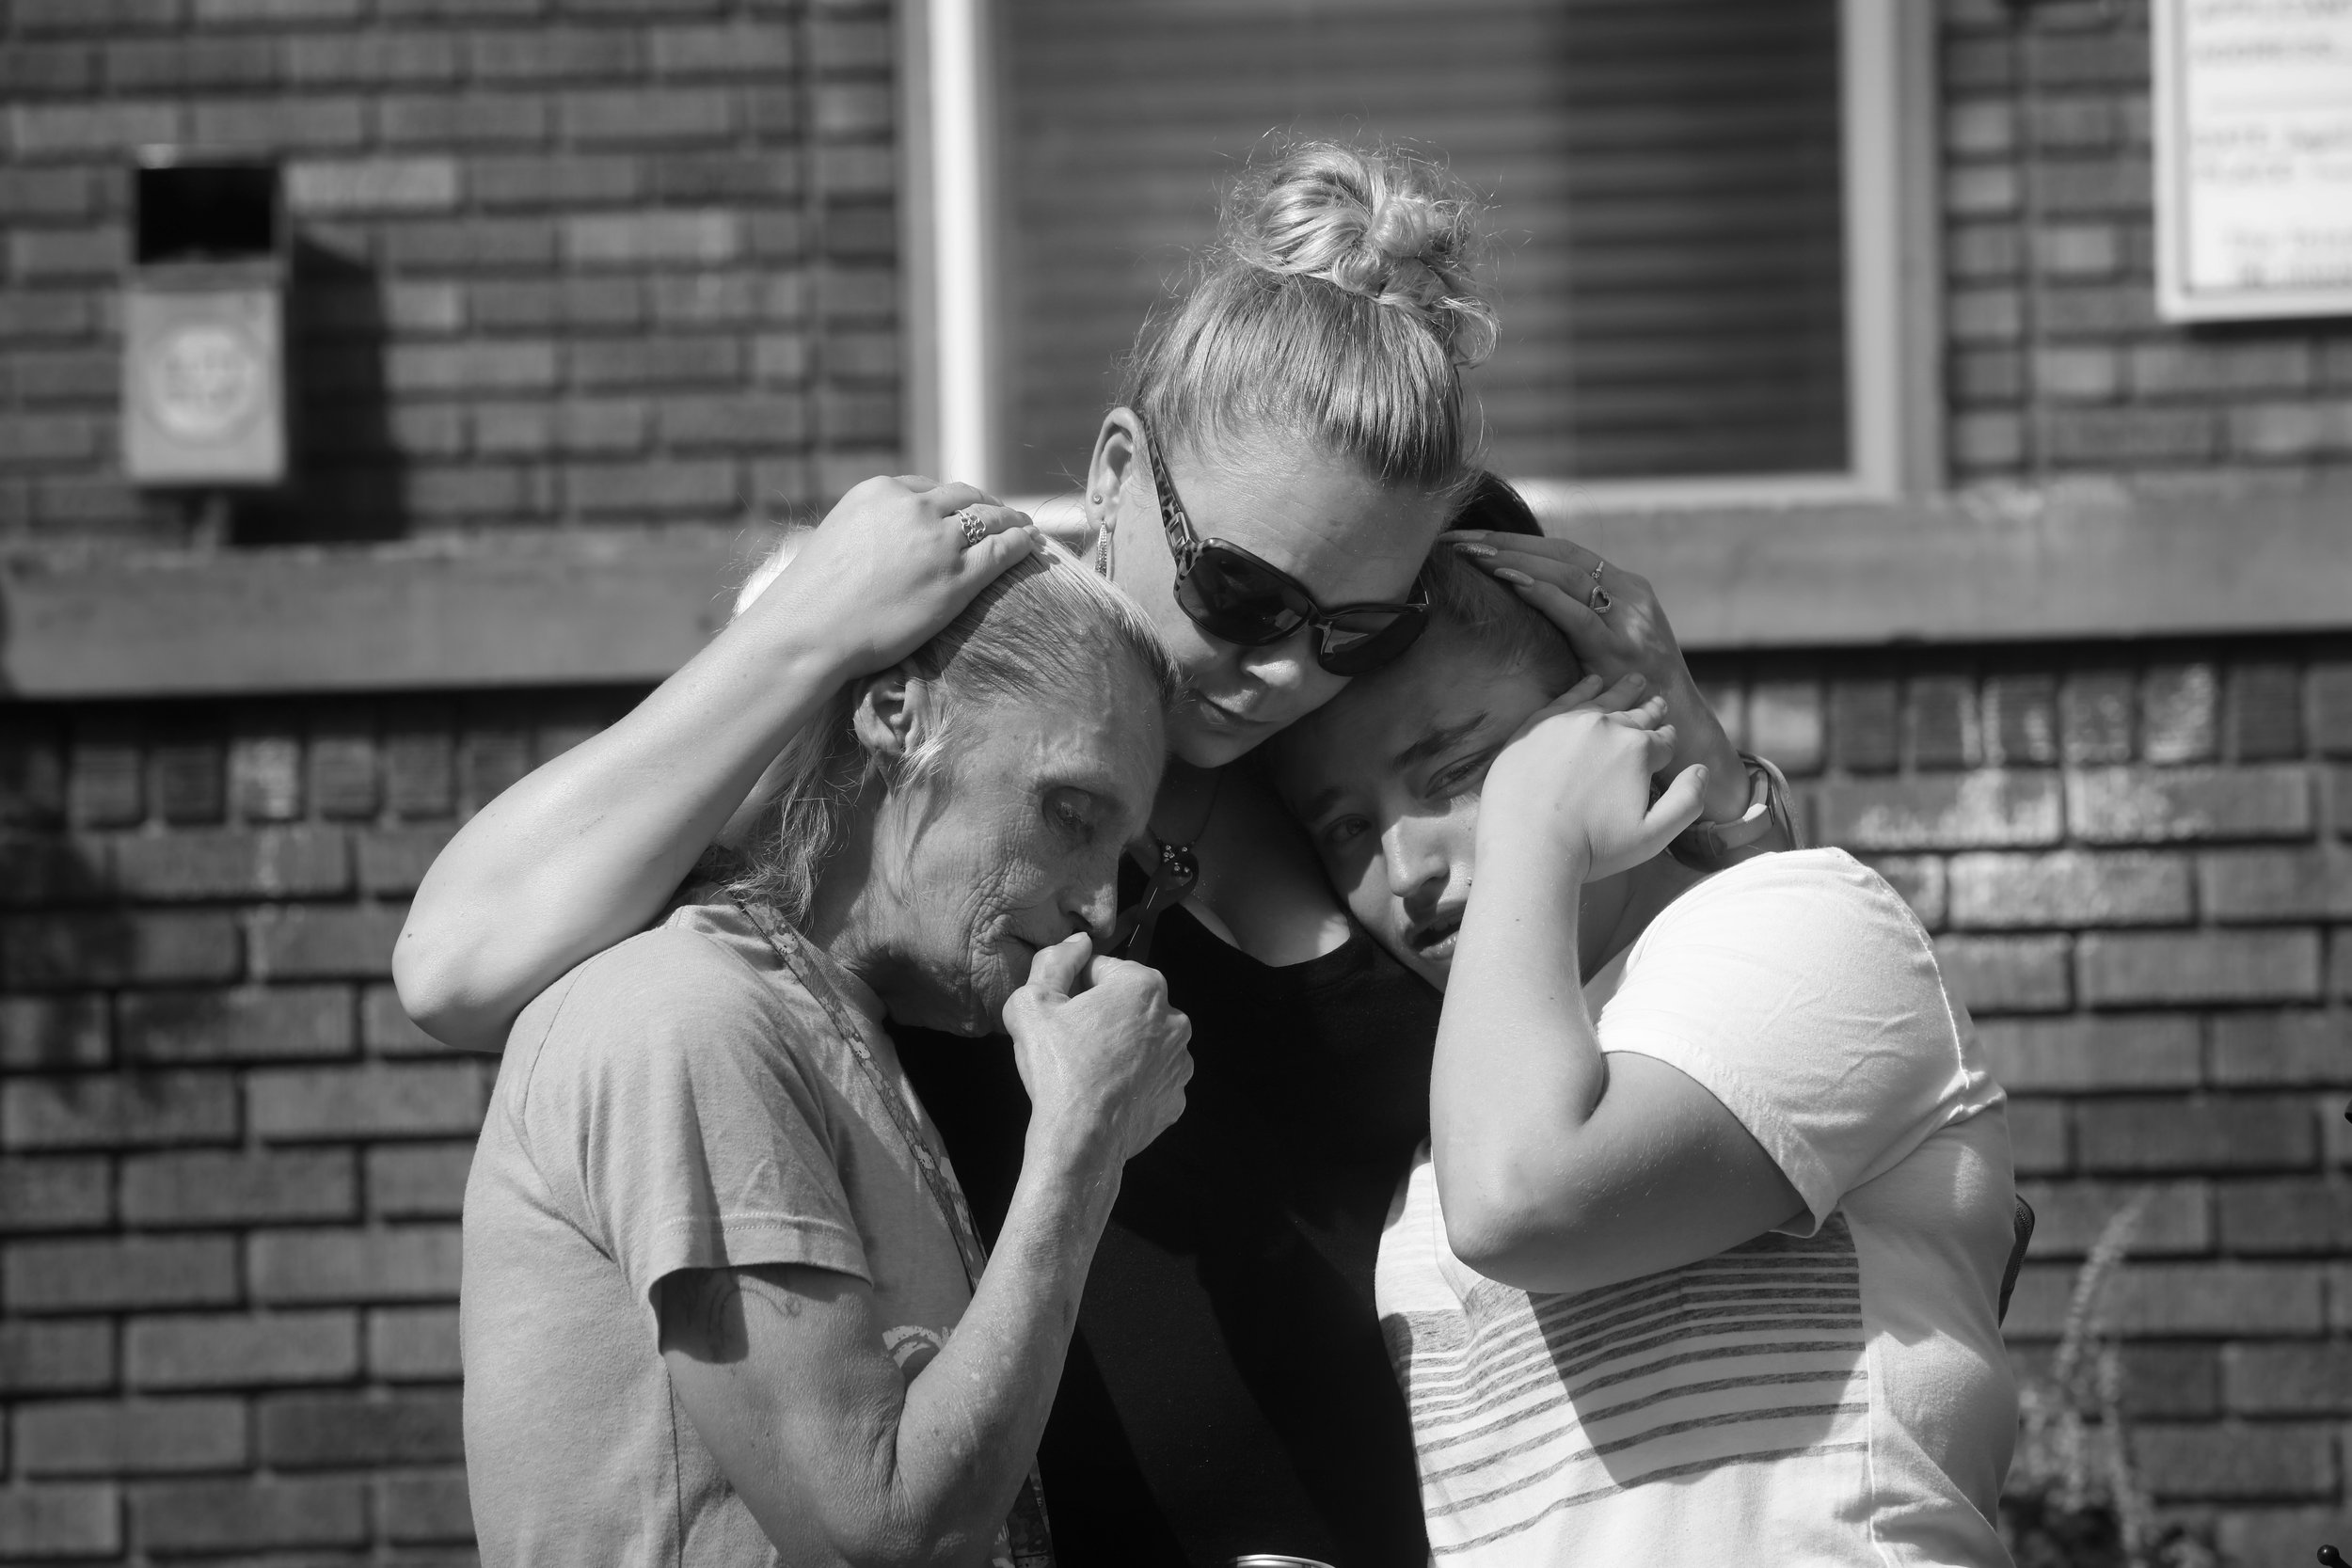  Mother, left, and daughter, right, are embraced by a friend as they remember a family member, who died of complications from opioid addiction, during a remembrance event at the Northwest Ohio Syringe Services, a harm reduction program that works wit